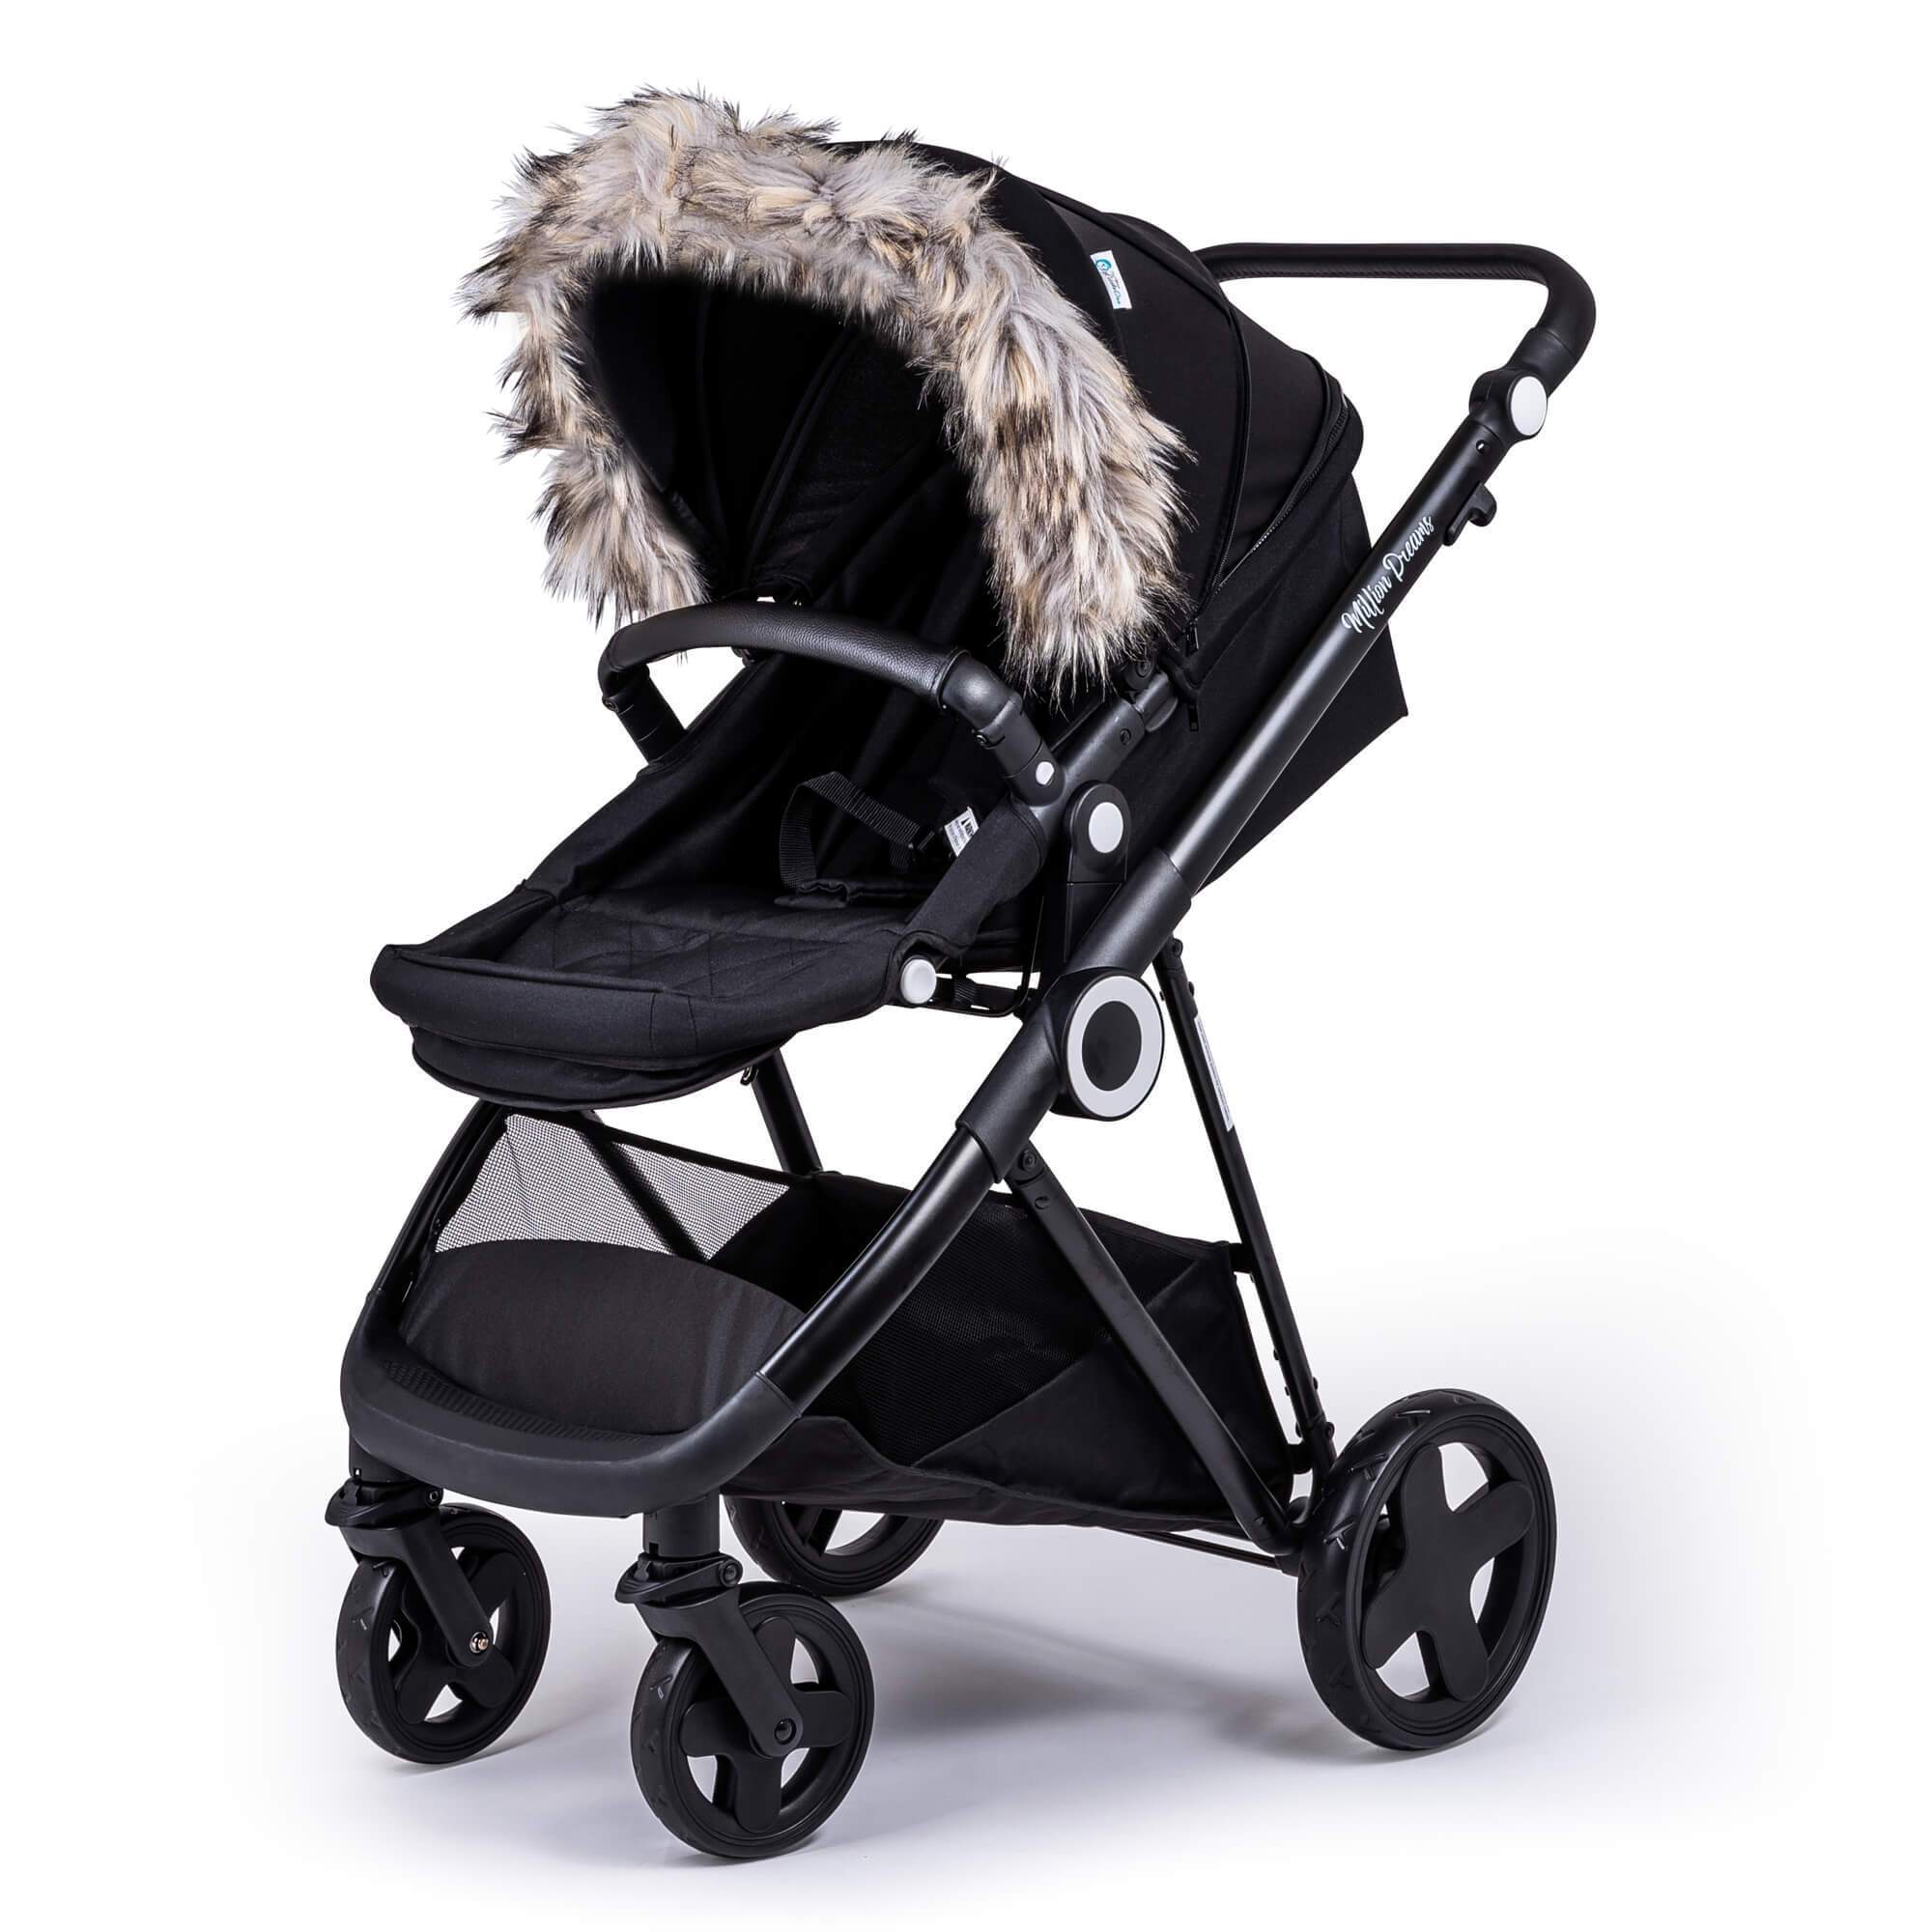 Pram Fur Hood Trim Attachment For Pushchair Compatible with Gb - Light Grey / Fits All Models | For Your Little One